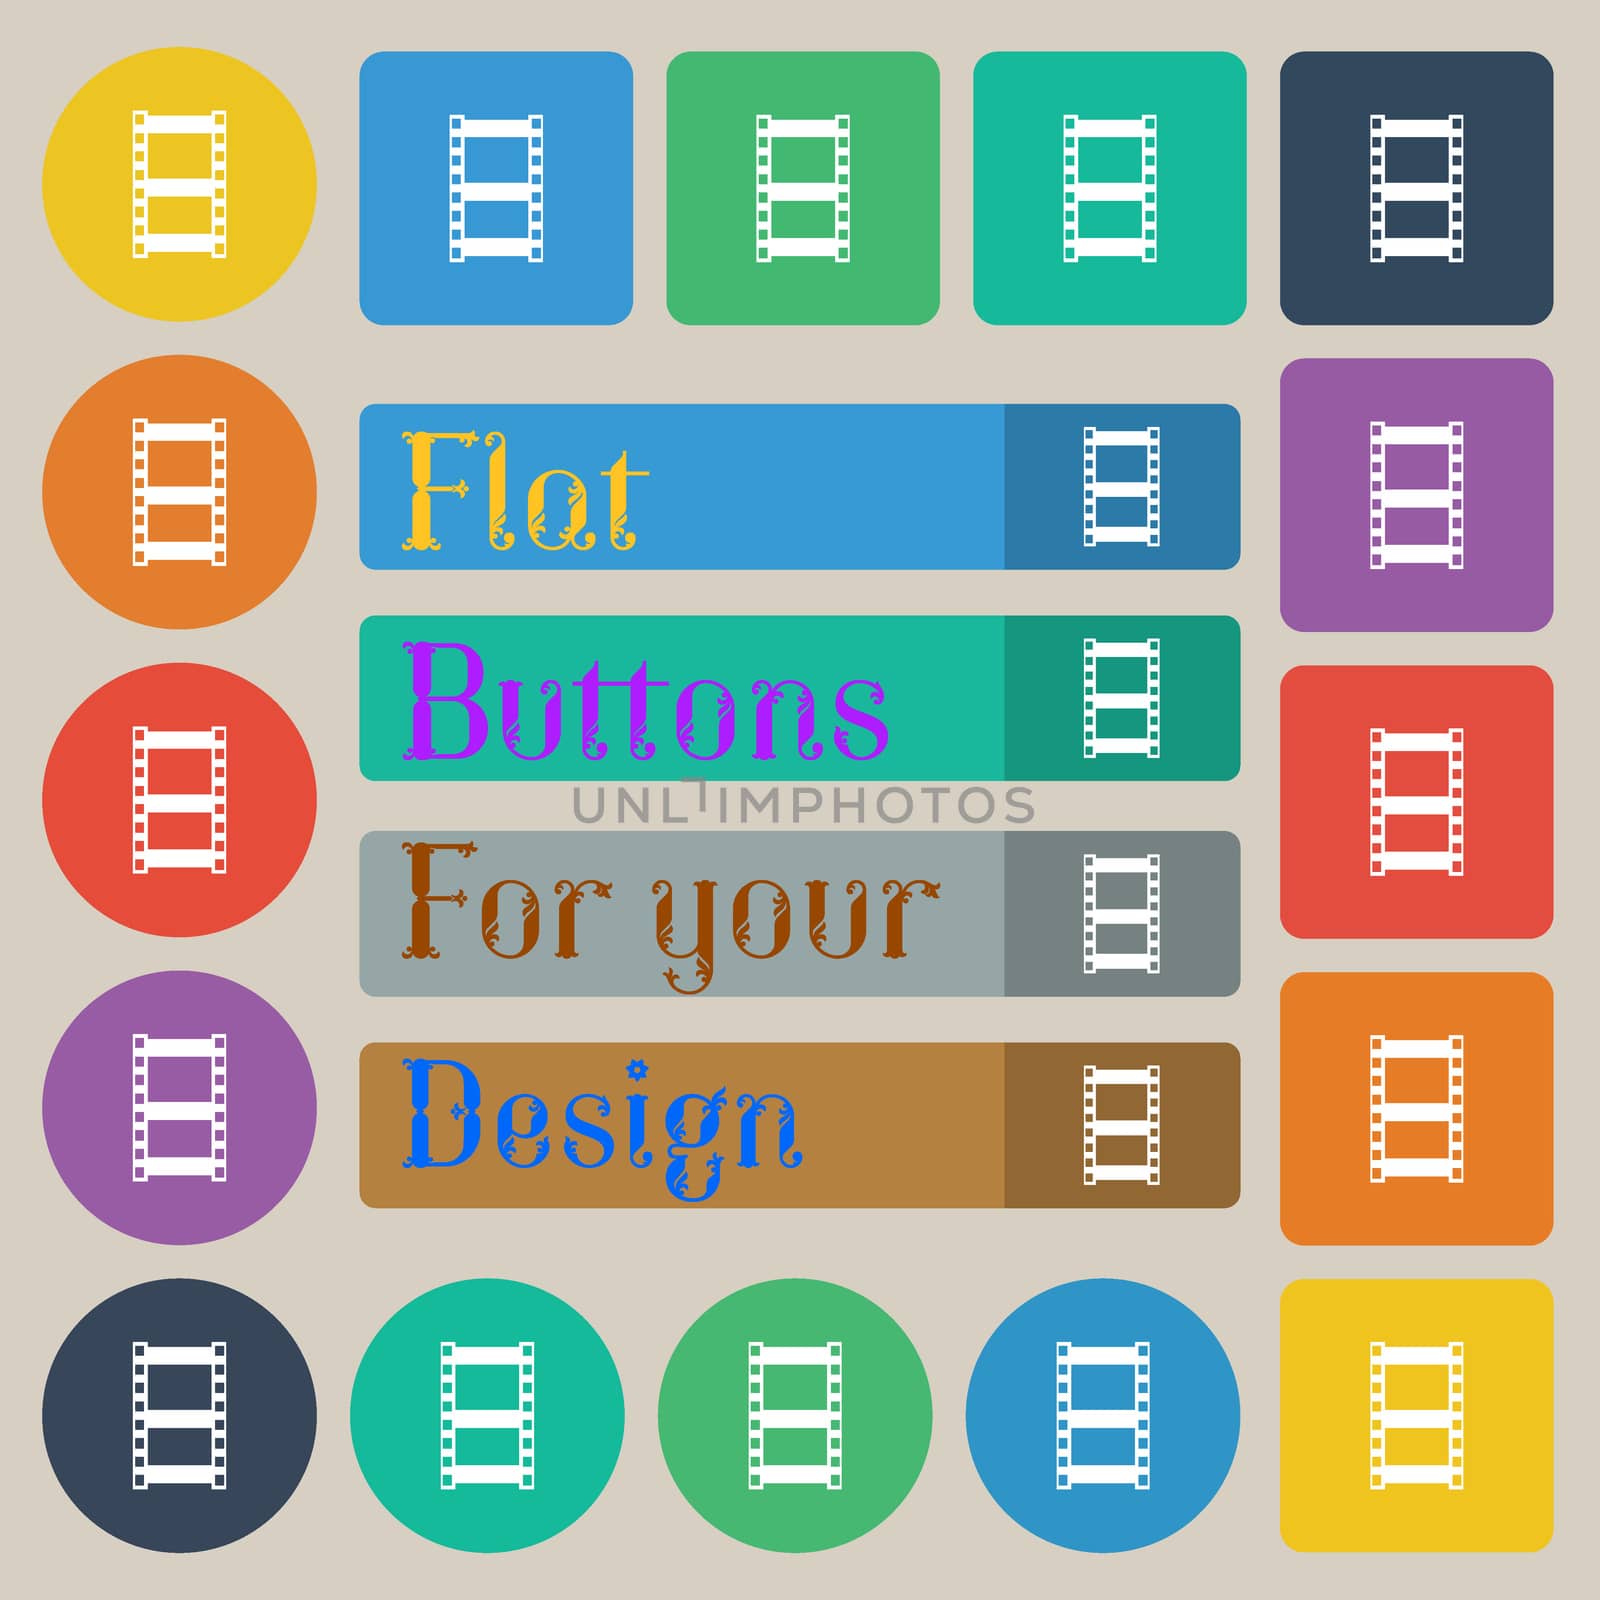 Video sign icon. Video frame symbol. Set of twenty colored flat, round, square and rectangular buttons. illustration